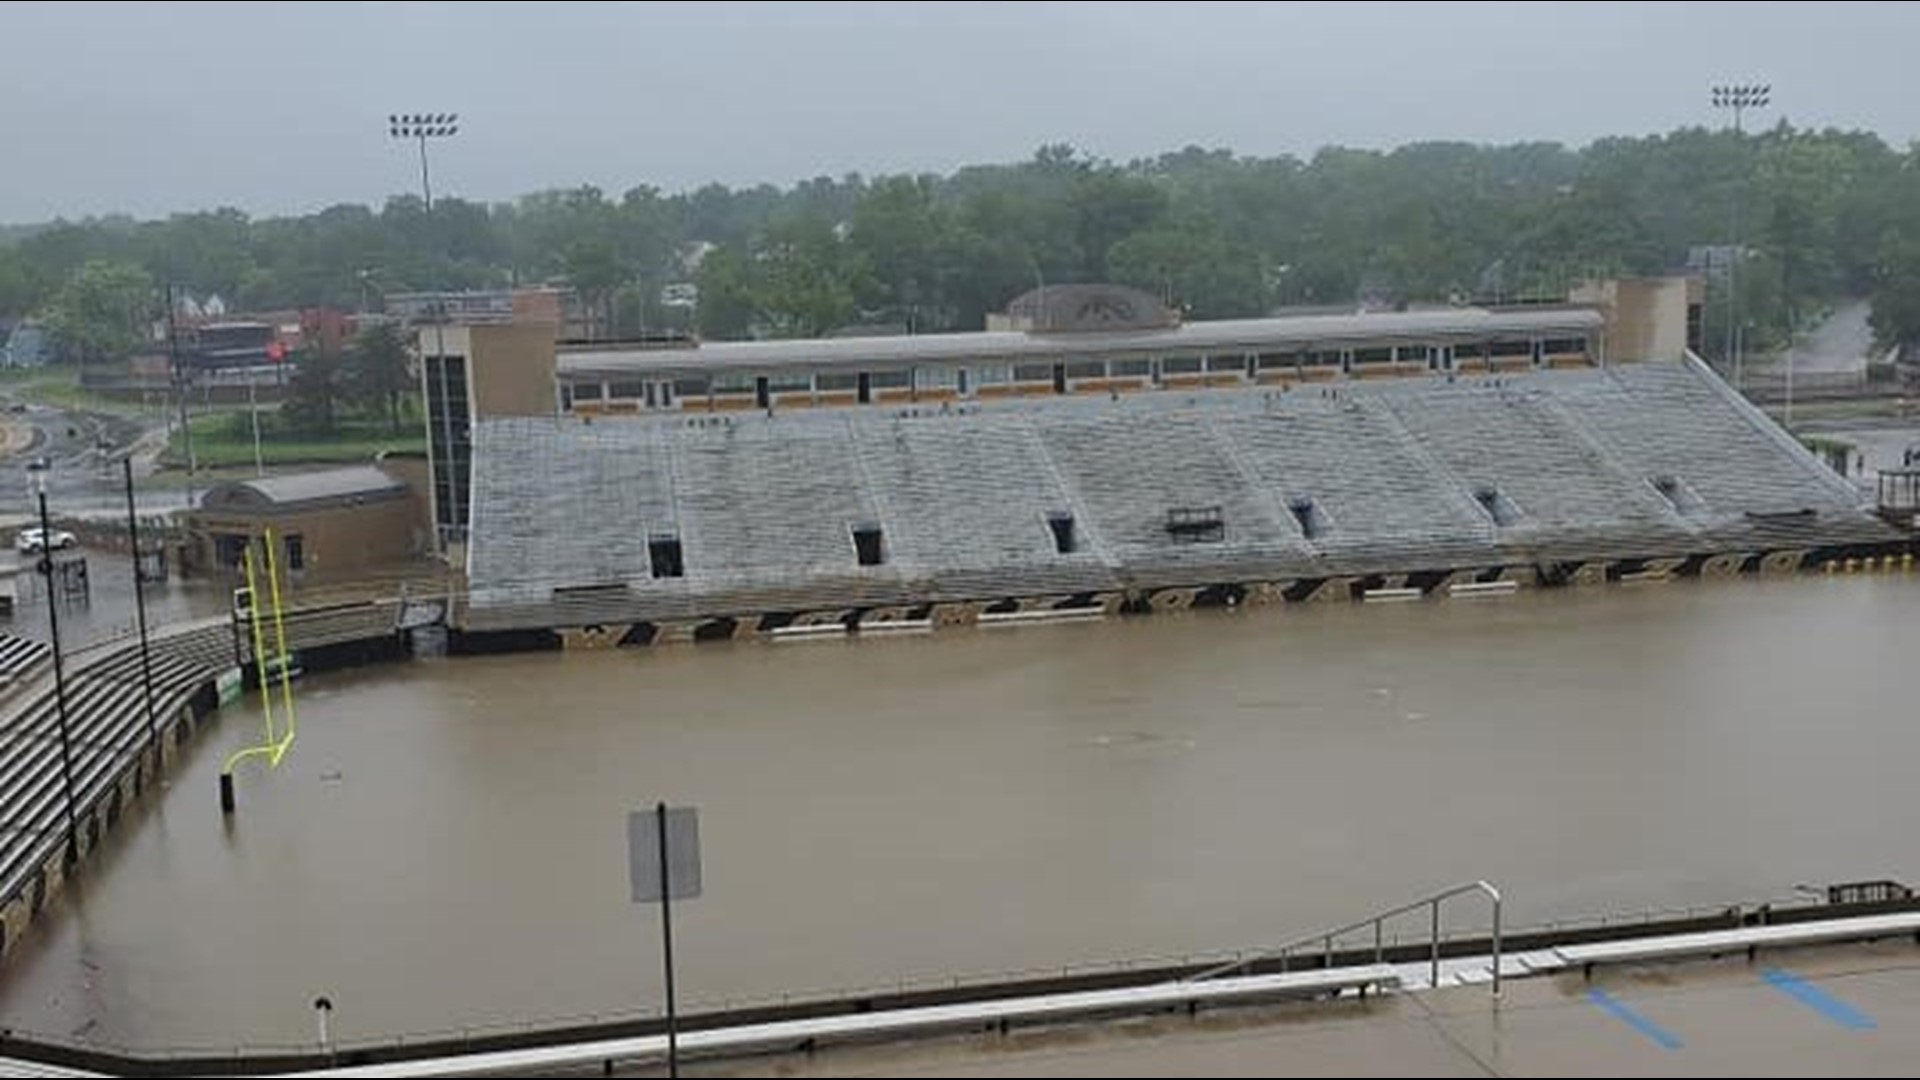 Flooding is causing issues for folks in Kalamazoo. Overnight rains pushed water levels up, causing flooding in many low-lying areas -- including Waldo Stadium at WMU.